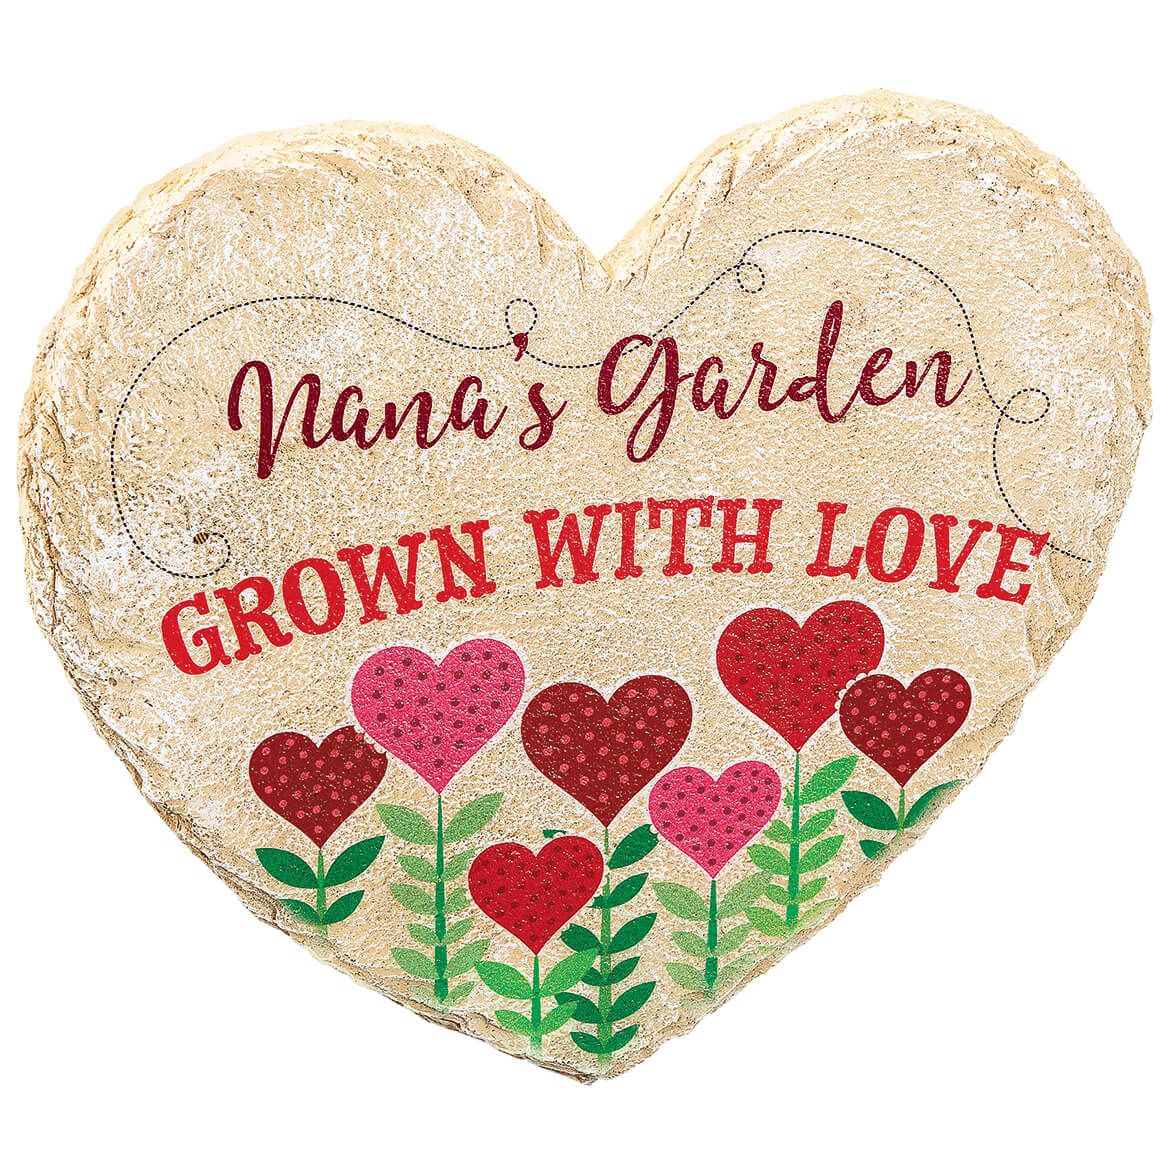 Personalized Heart-Shaped "Grown with Love" Garden Stone + '-' + 374112